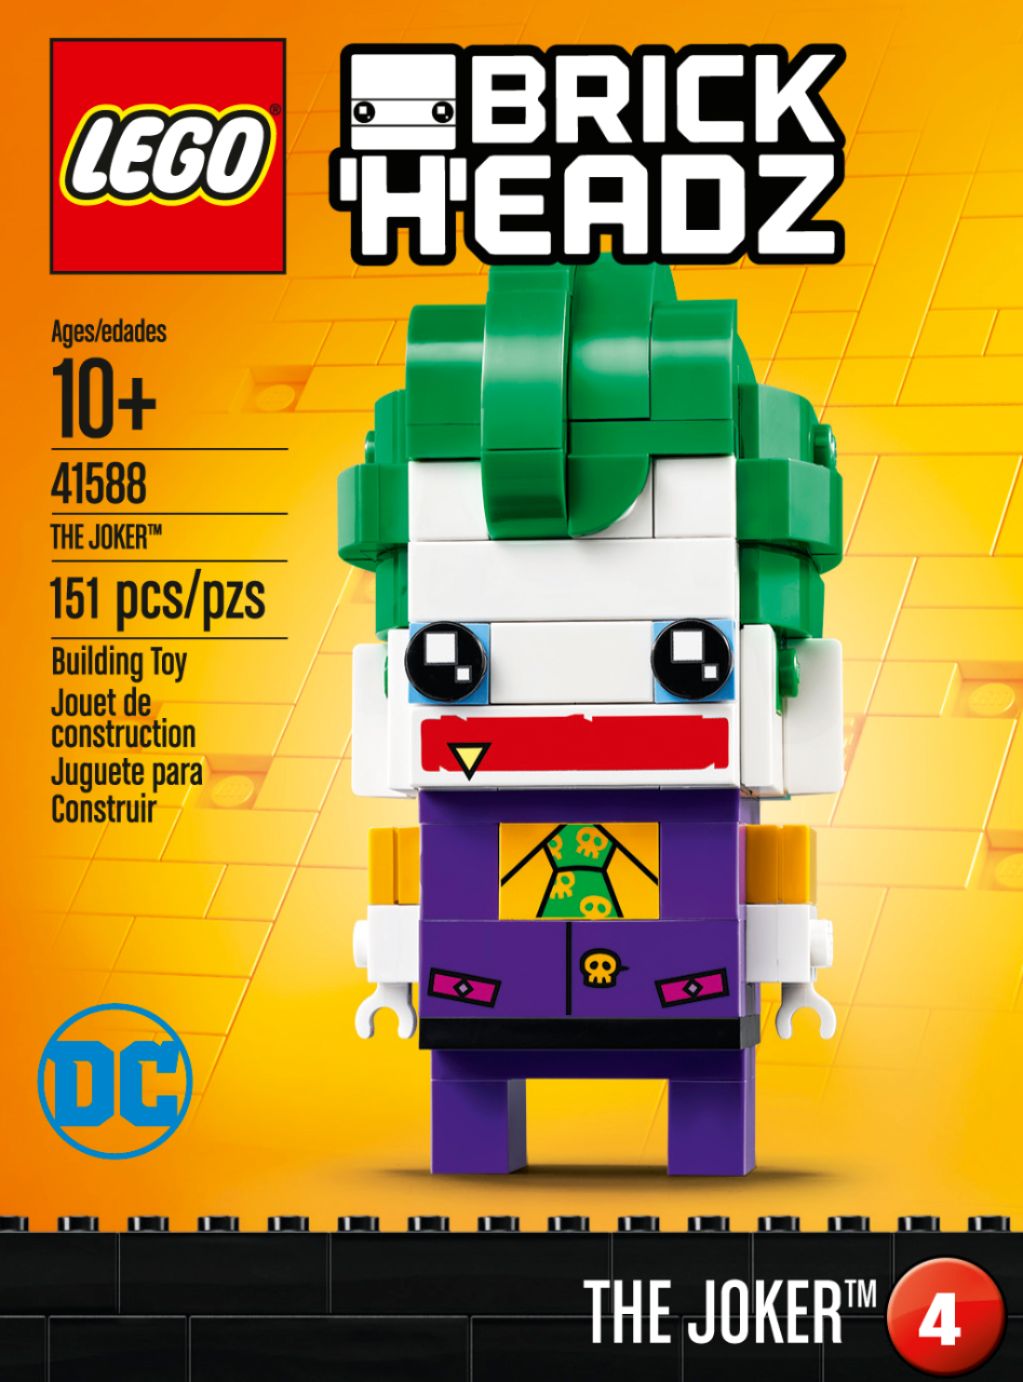 LEGO BrickHeadz DC characters from The LEGO Batman Movie [Review] - The  Brothers Brick